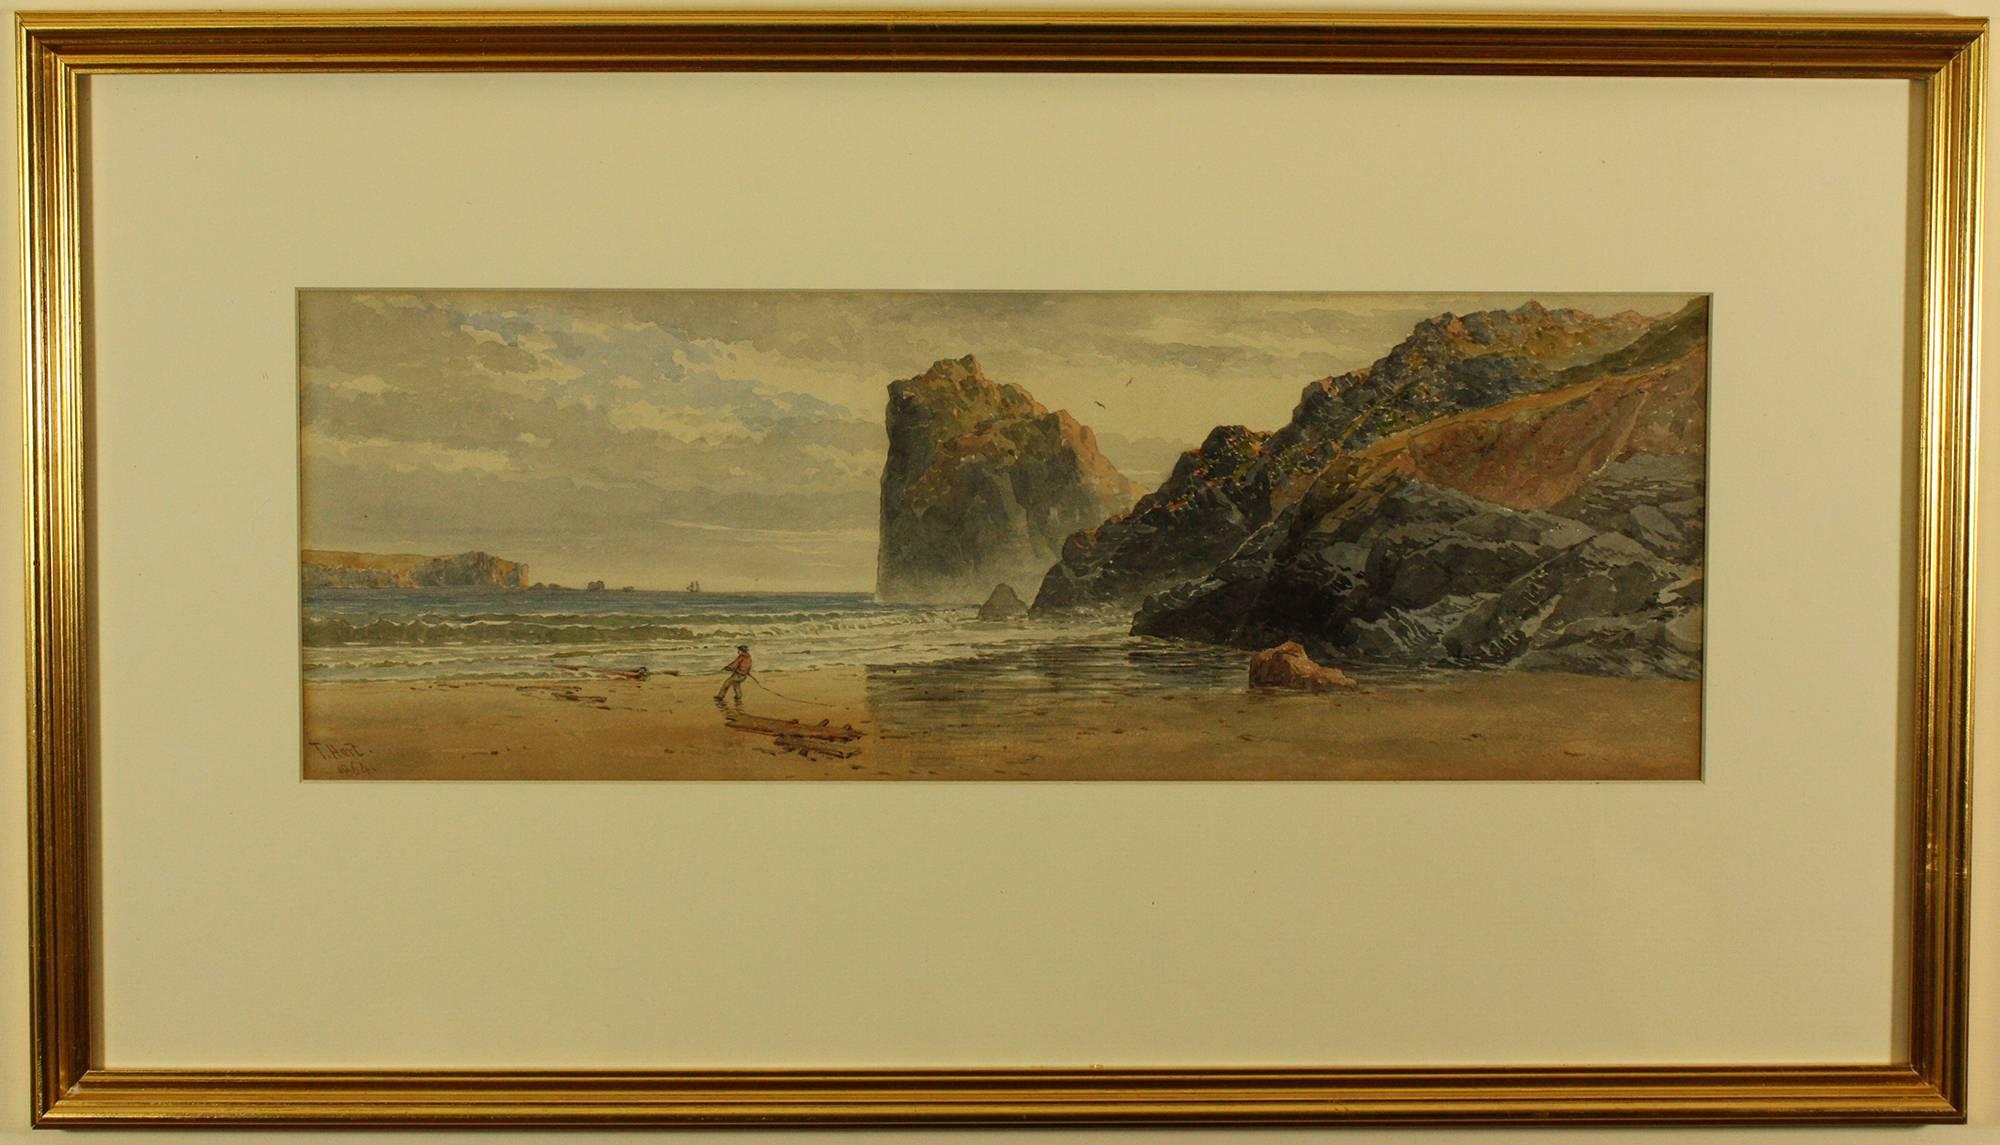 Wrecker on the Beach at Lion Rock by Thomas Hart painted 1864
A wrecker pulling a piece of drift wood from the sea near Lion Rock just above the Lizard, Cornwall.
Painted in 1864 when Thomas was 30 years old
imp
Thomas Hart 
Born 1830 Crowan